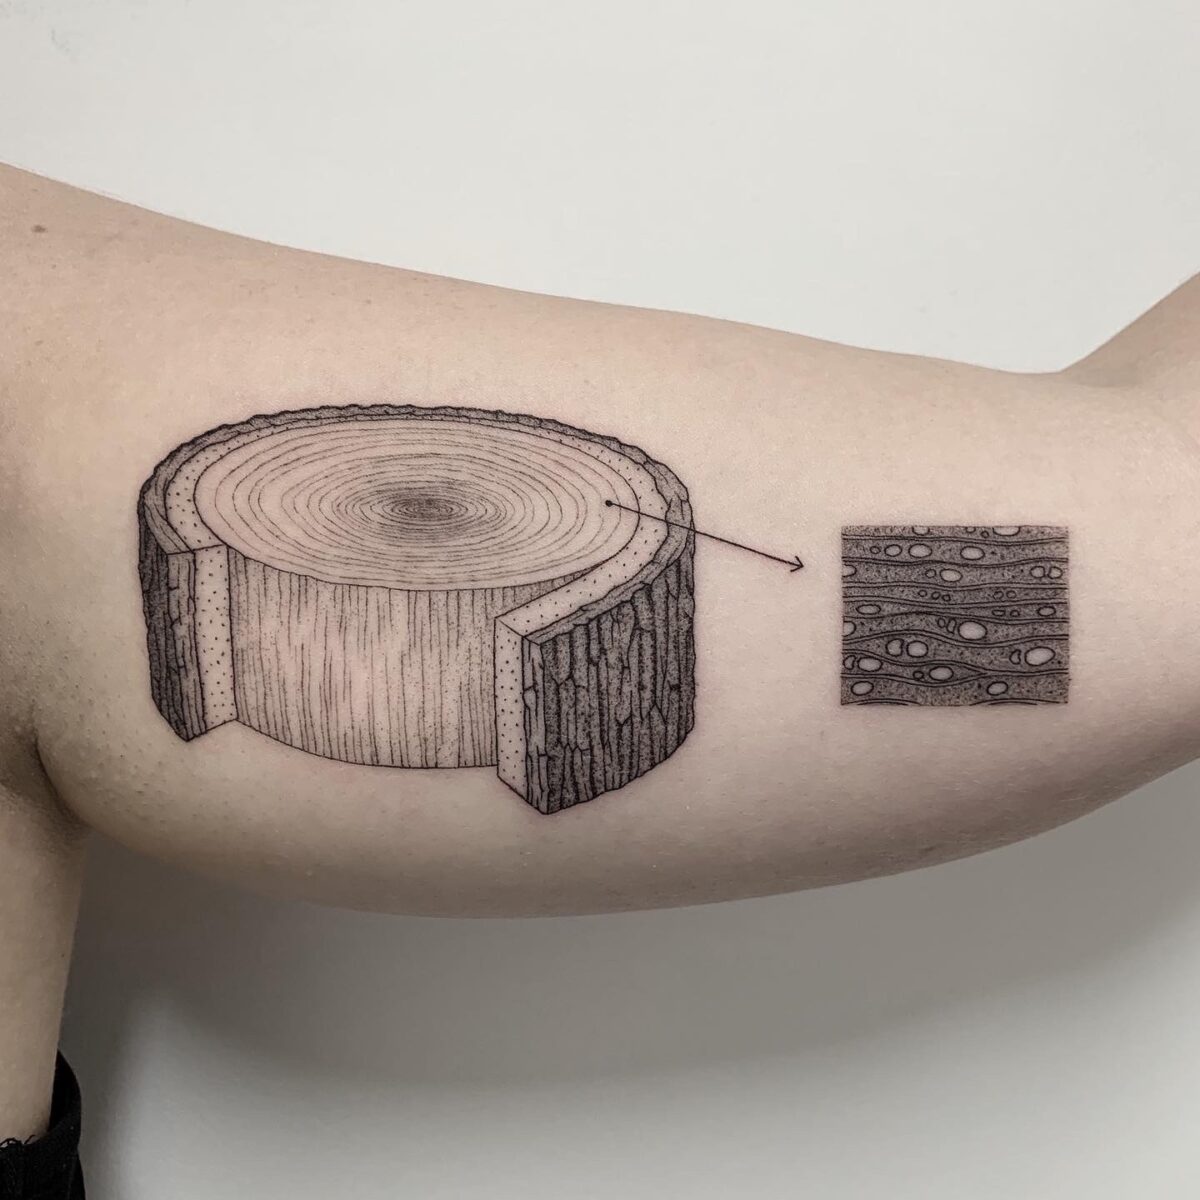 Whimsical Vintage Science Book Inspired Tattoos By Michele Volpi 5